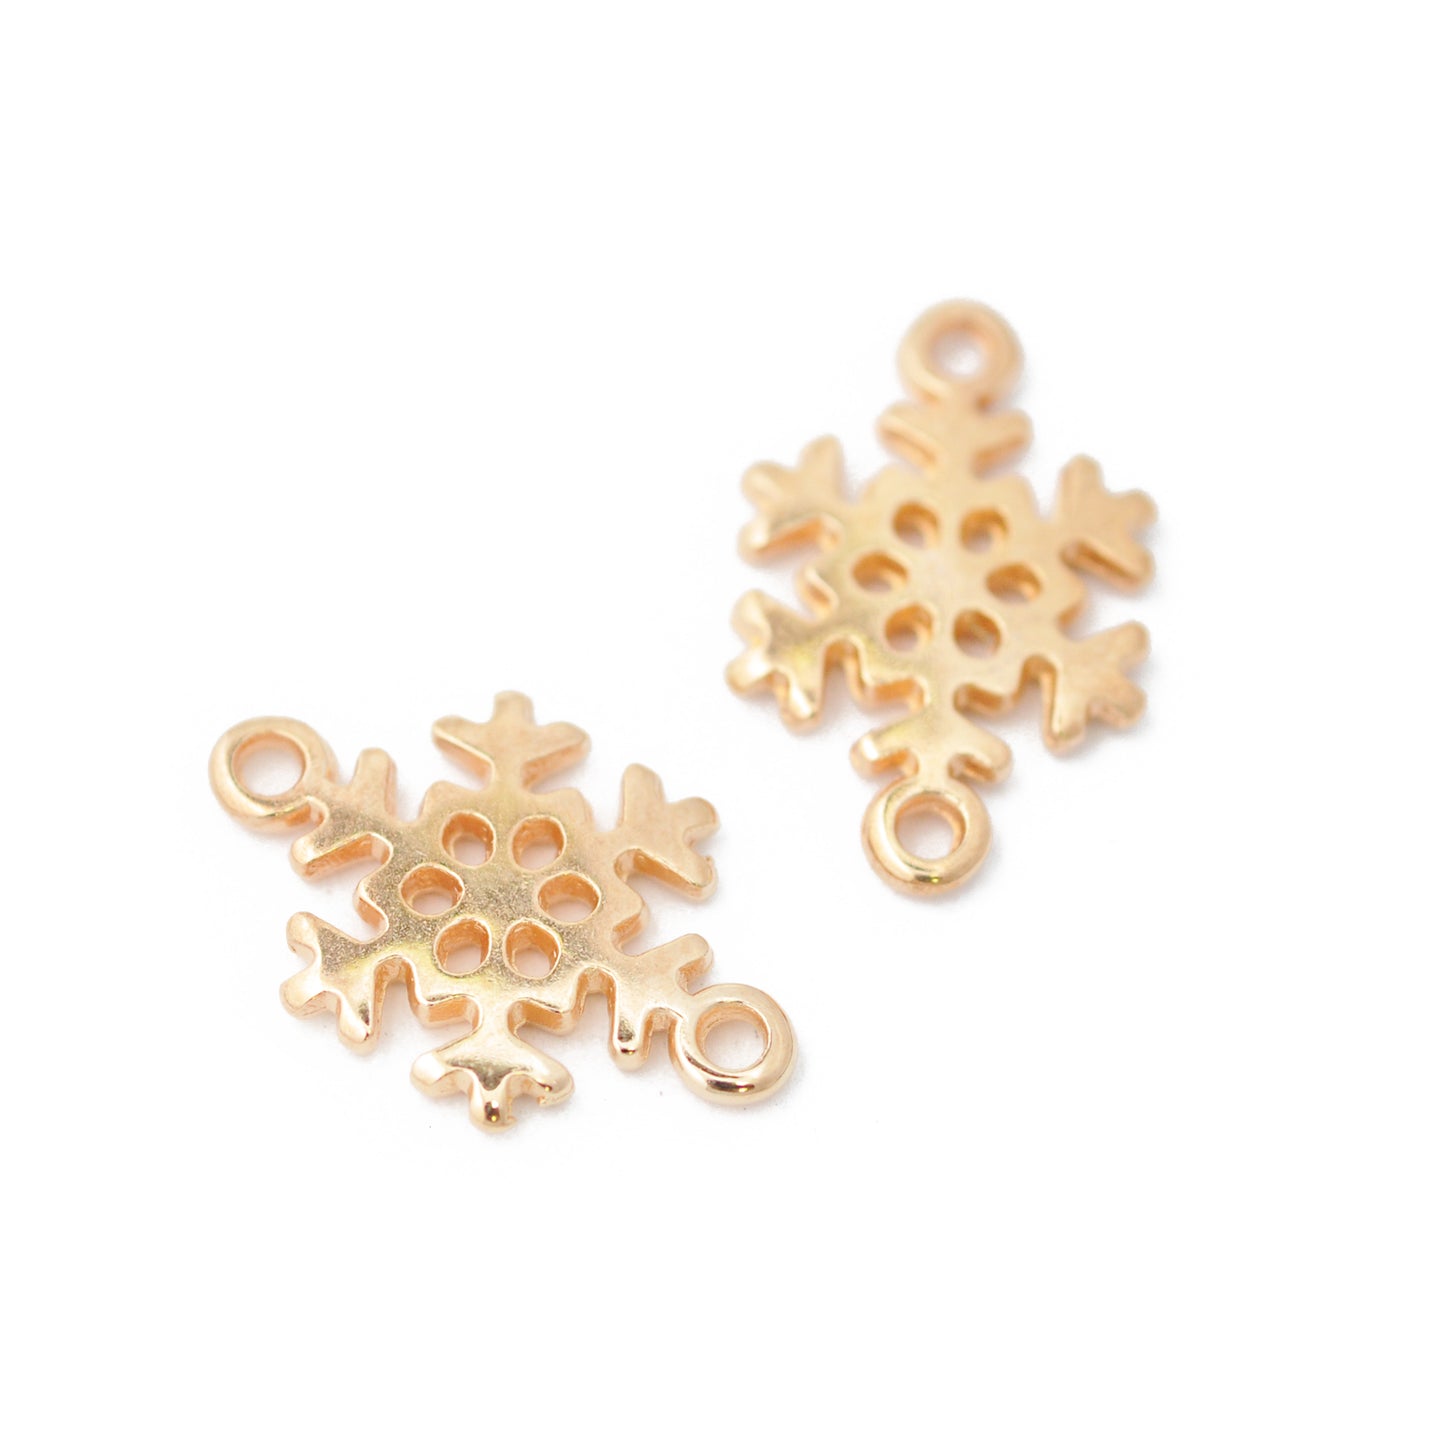 Snowflake connector / rose gold colored / 13 mm